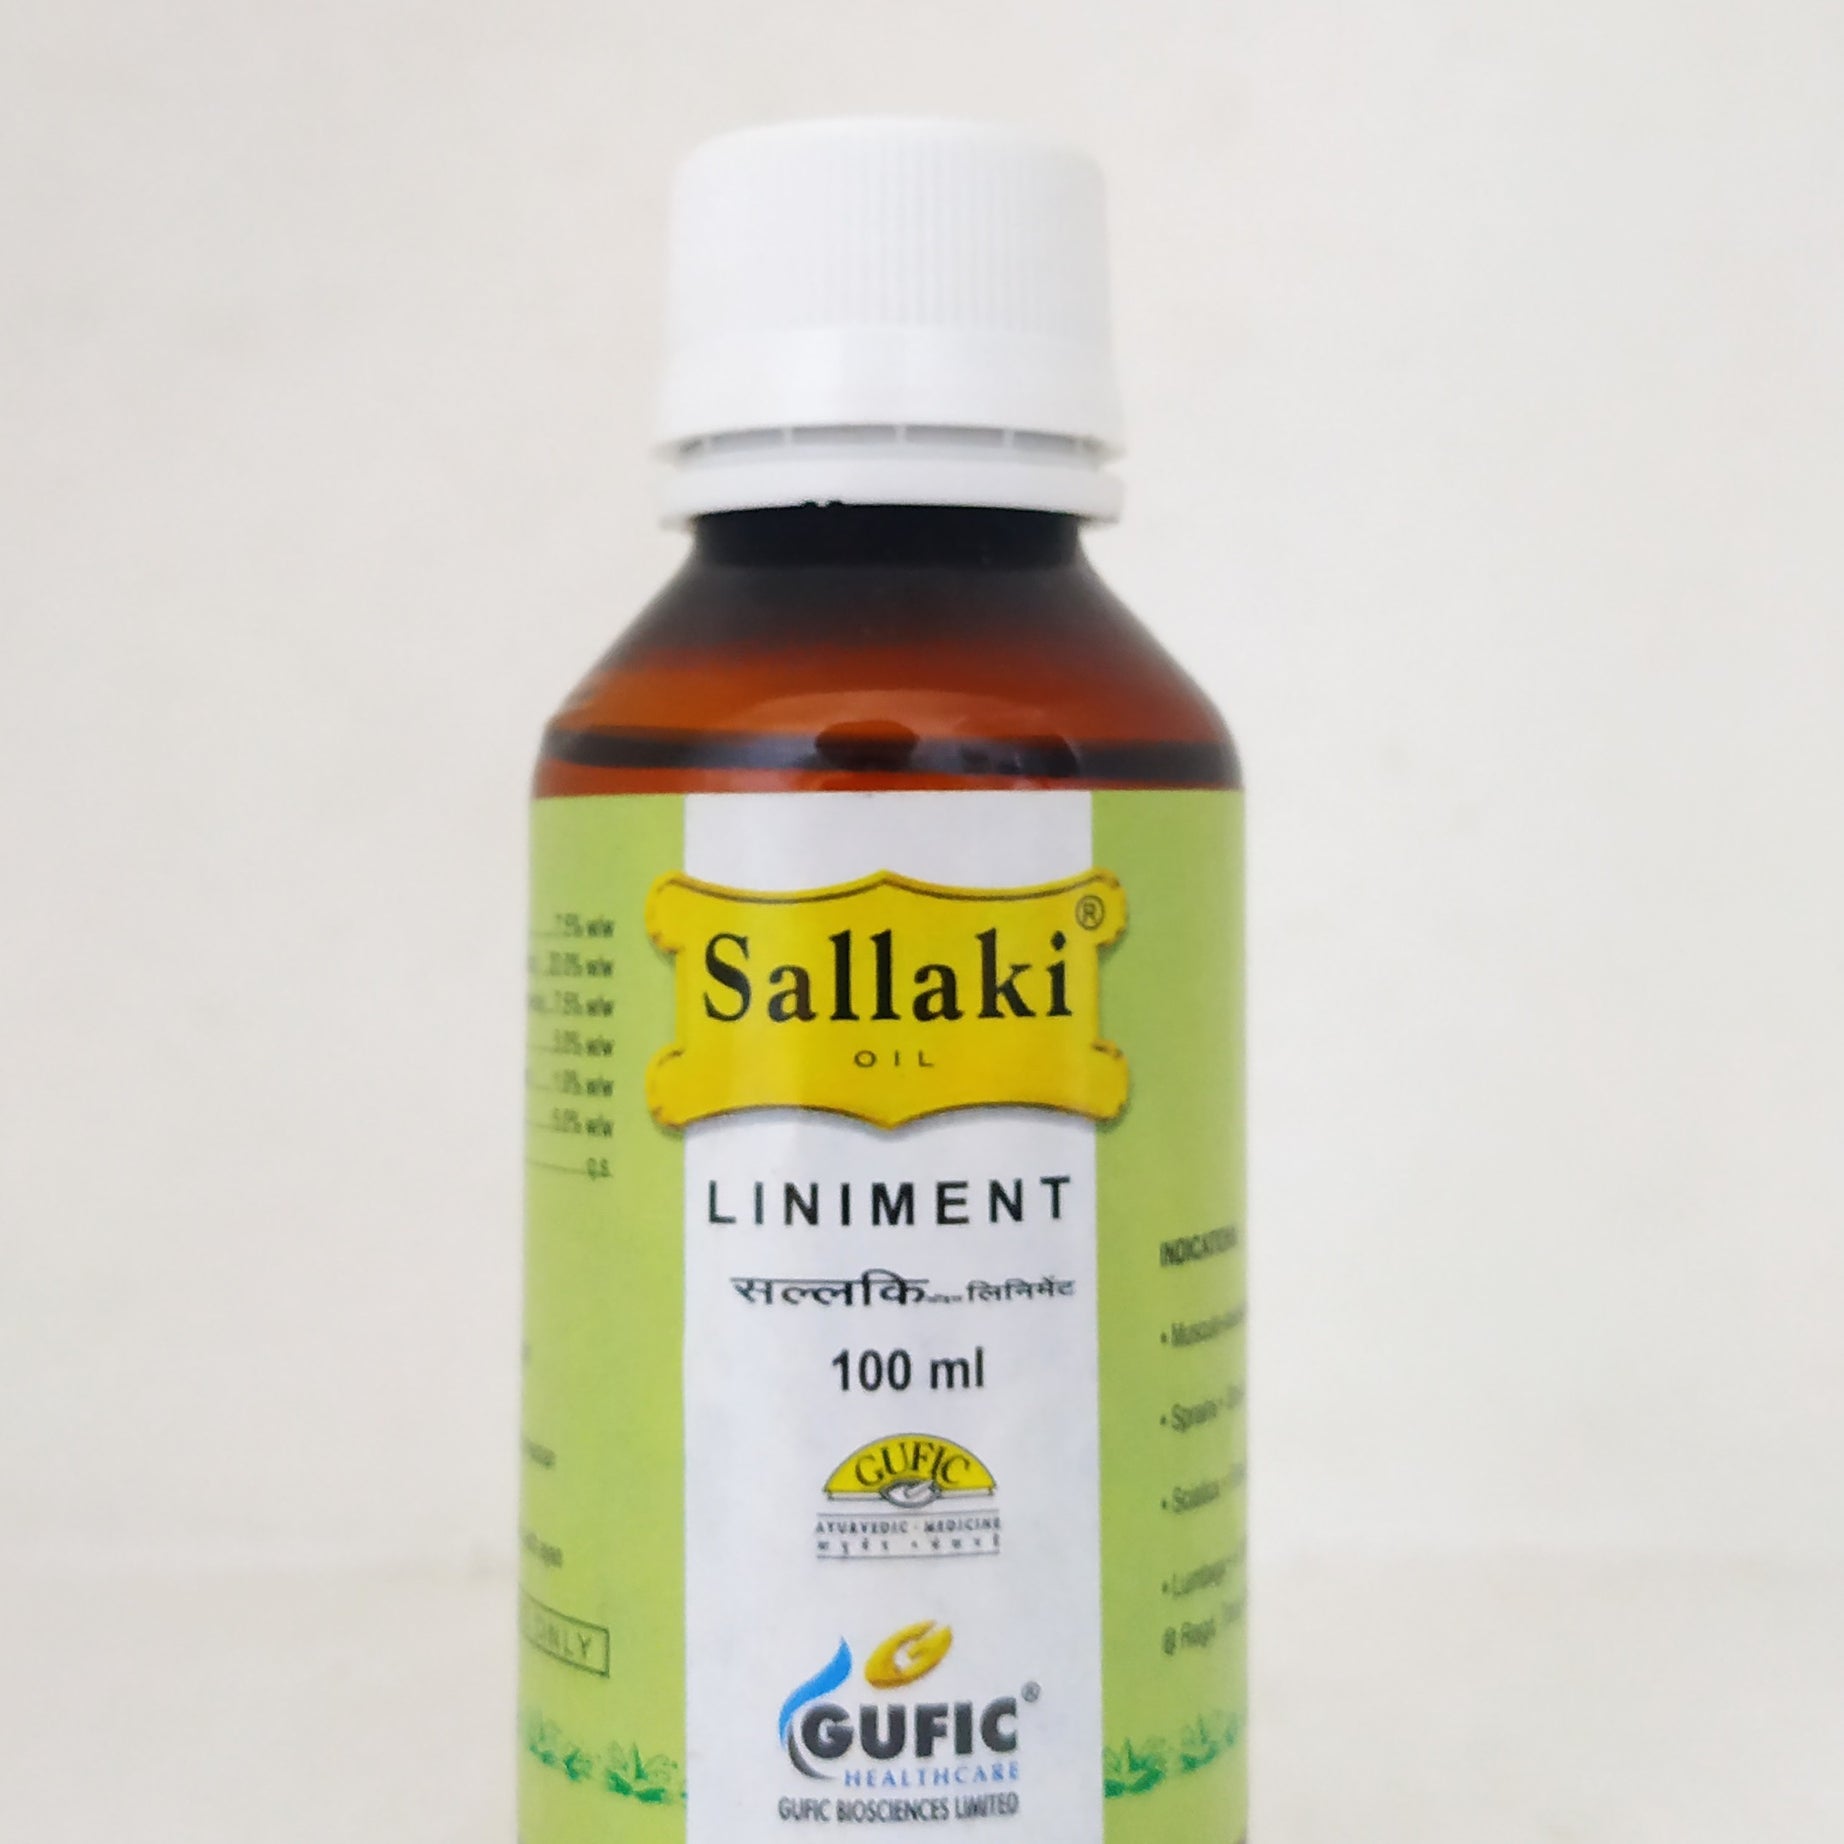 Shop Sallaki Liniment Oil 100ml at price 176.00 from Gufic Online - Ayush Care